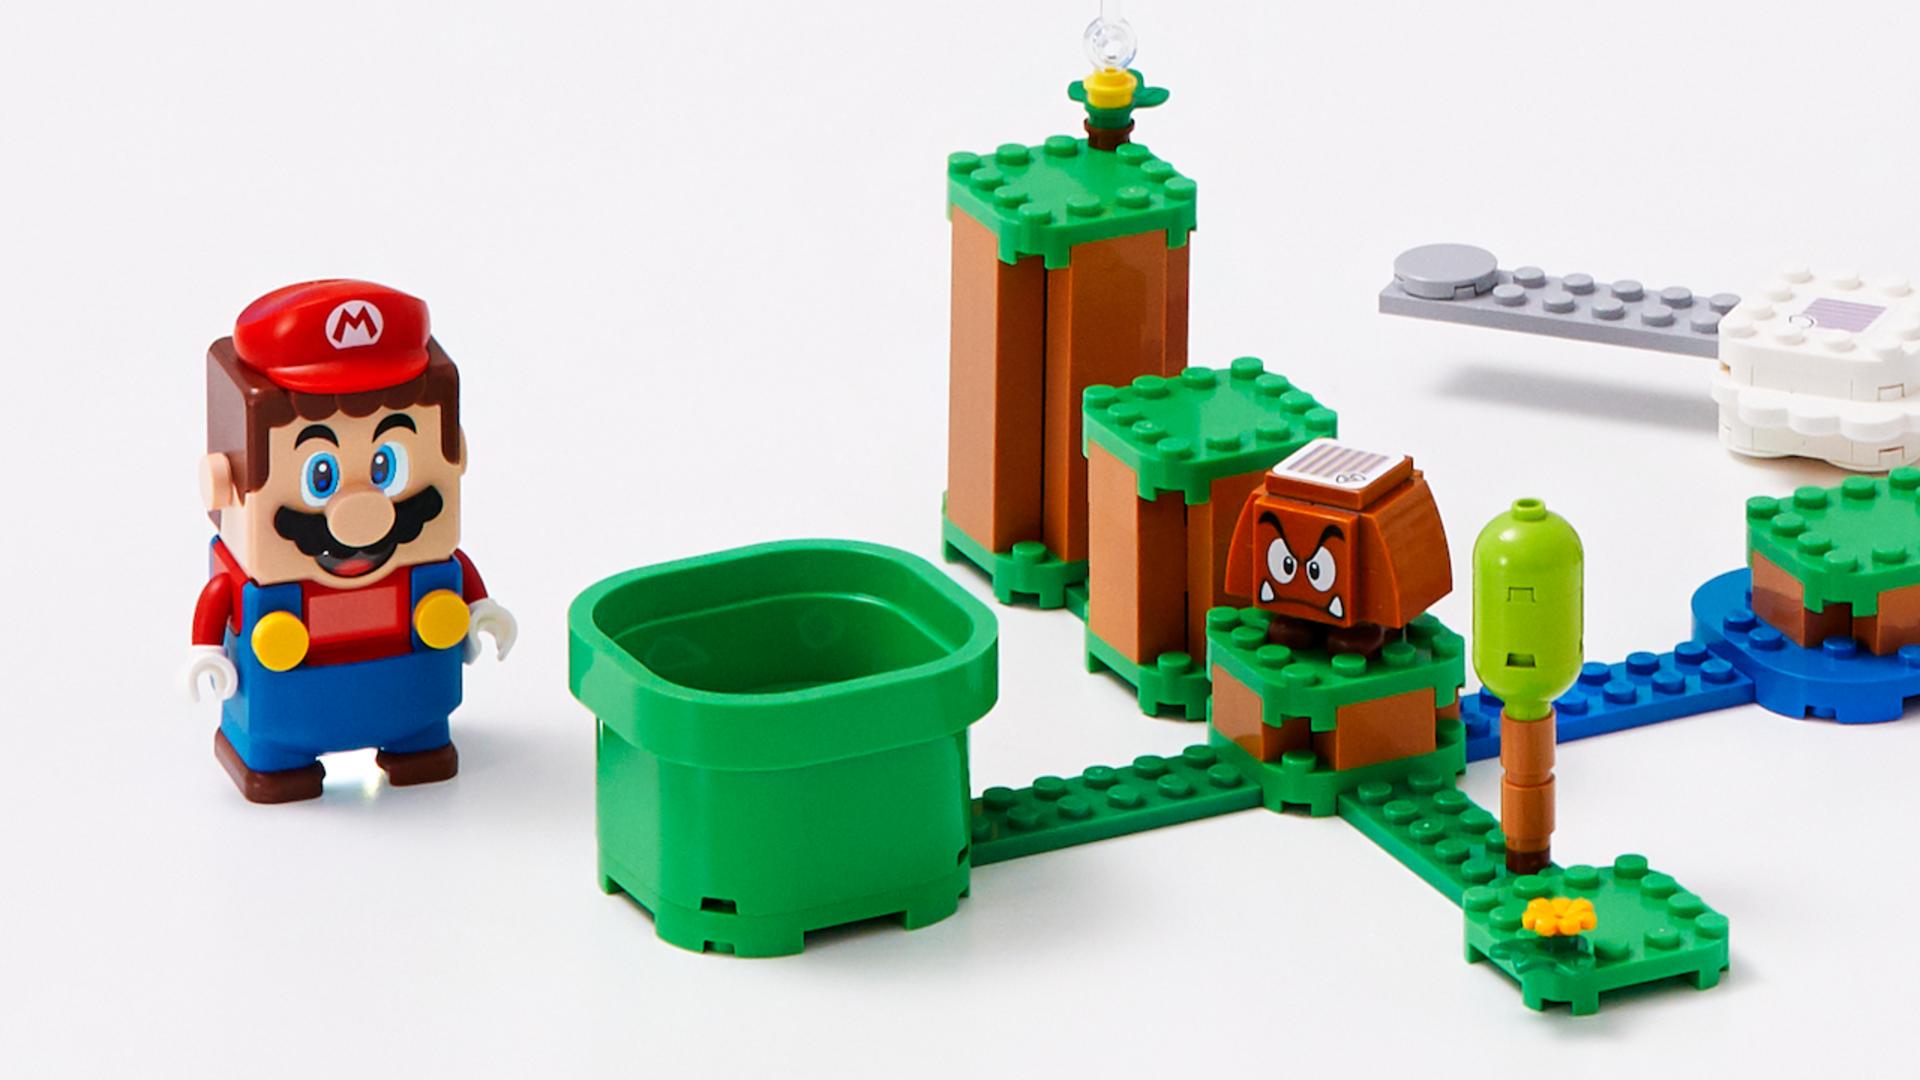 The Lego Mario Starter Set Will Cost the Same as a Full Price Mario Game